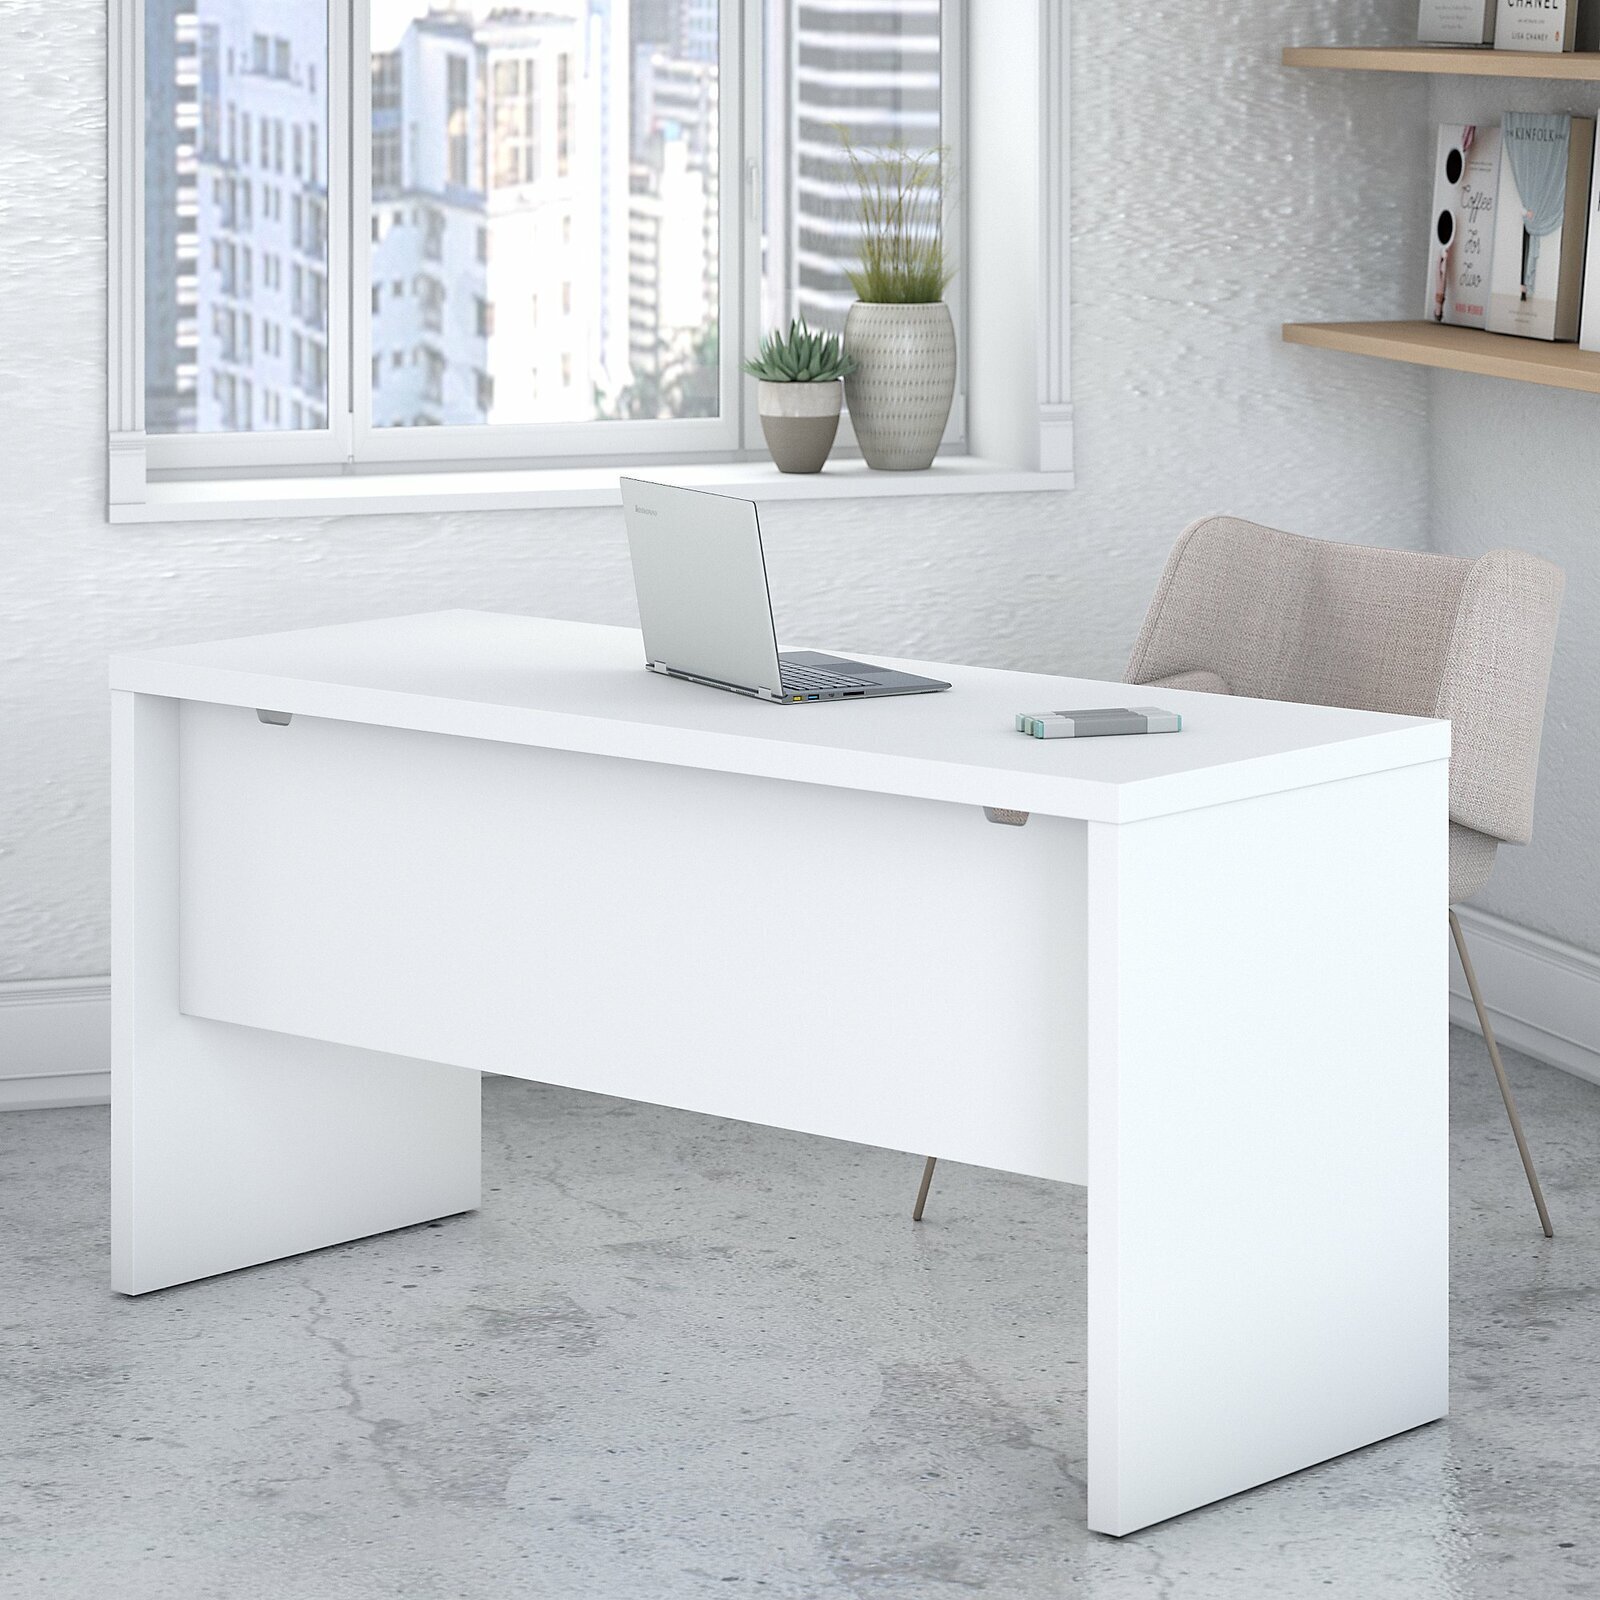 CLASSIC WHITE WOOD COMPUTER DESK OFFICE FURNITURE~WORKSTATION RET $229.95 NEW 